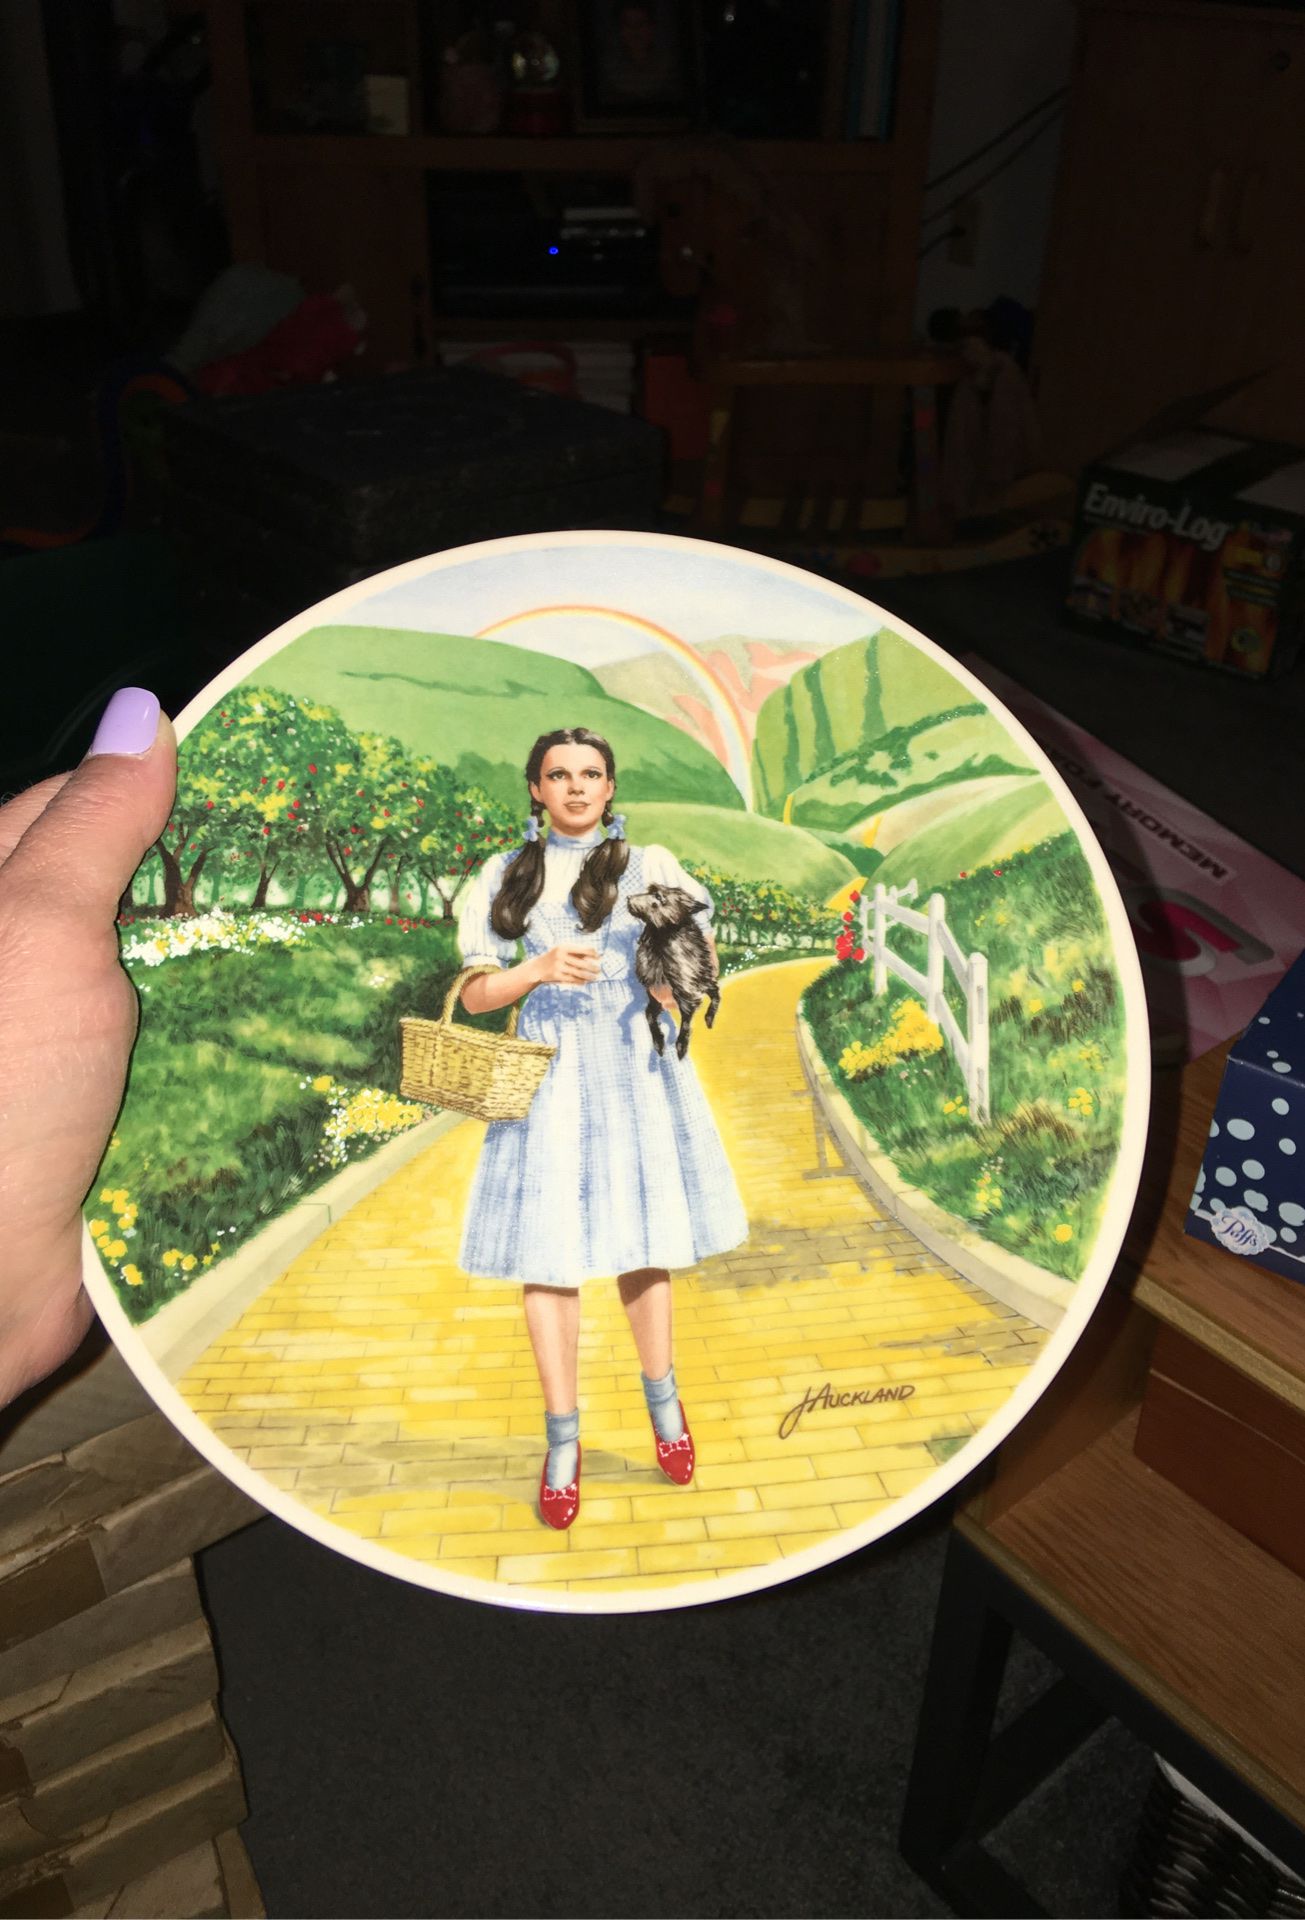 Over the Rainbow featuring Dorthy in The Wizard of Oz